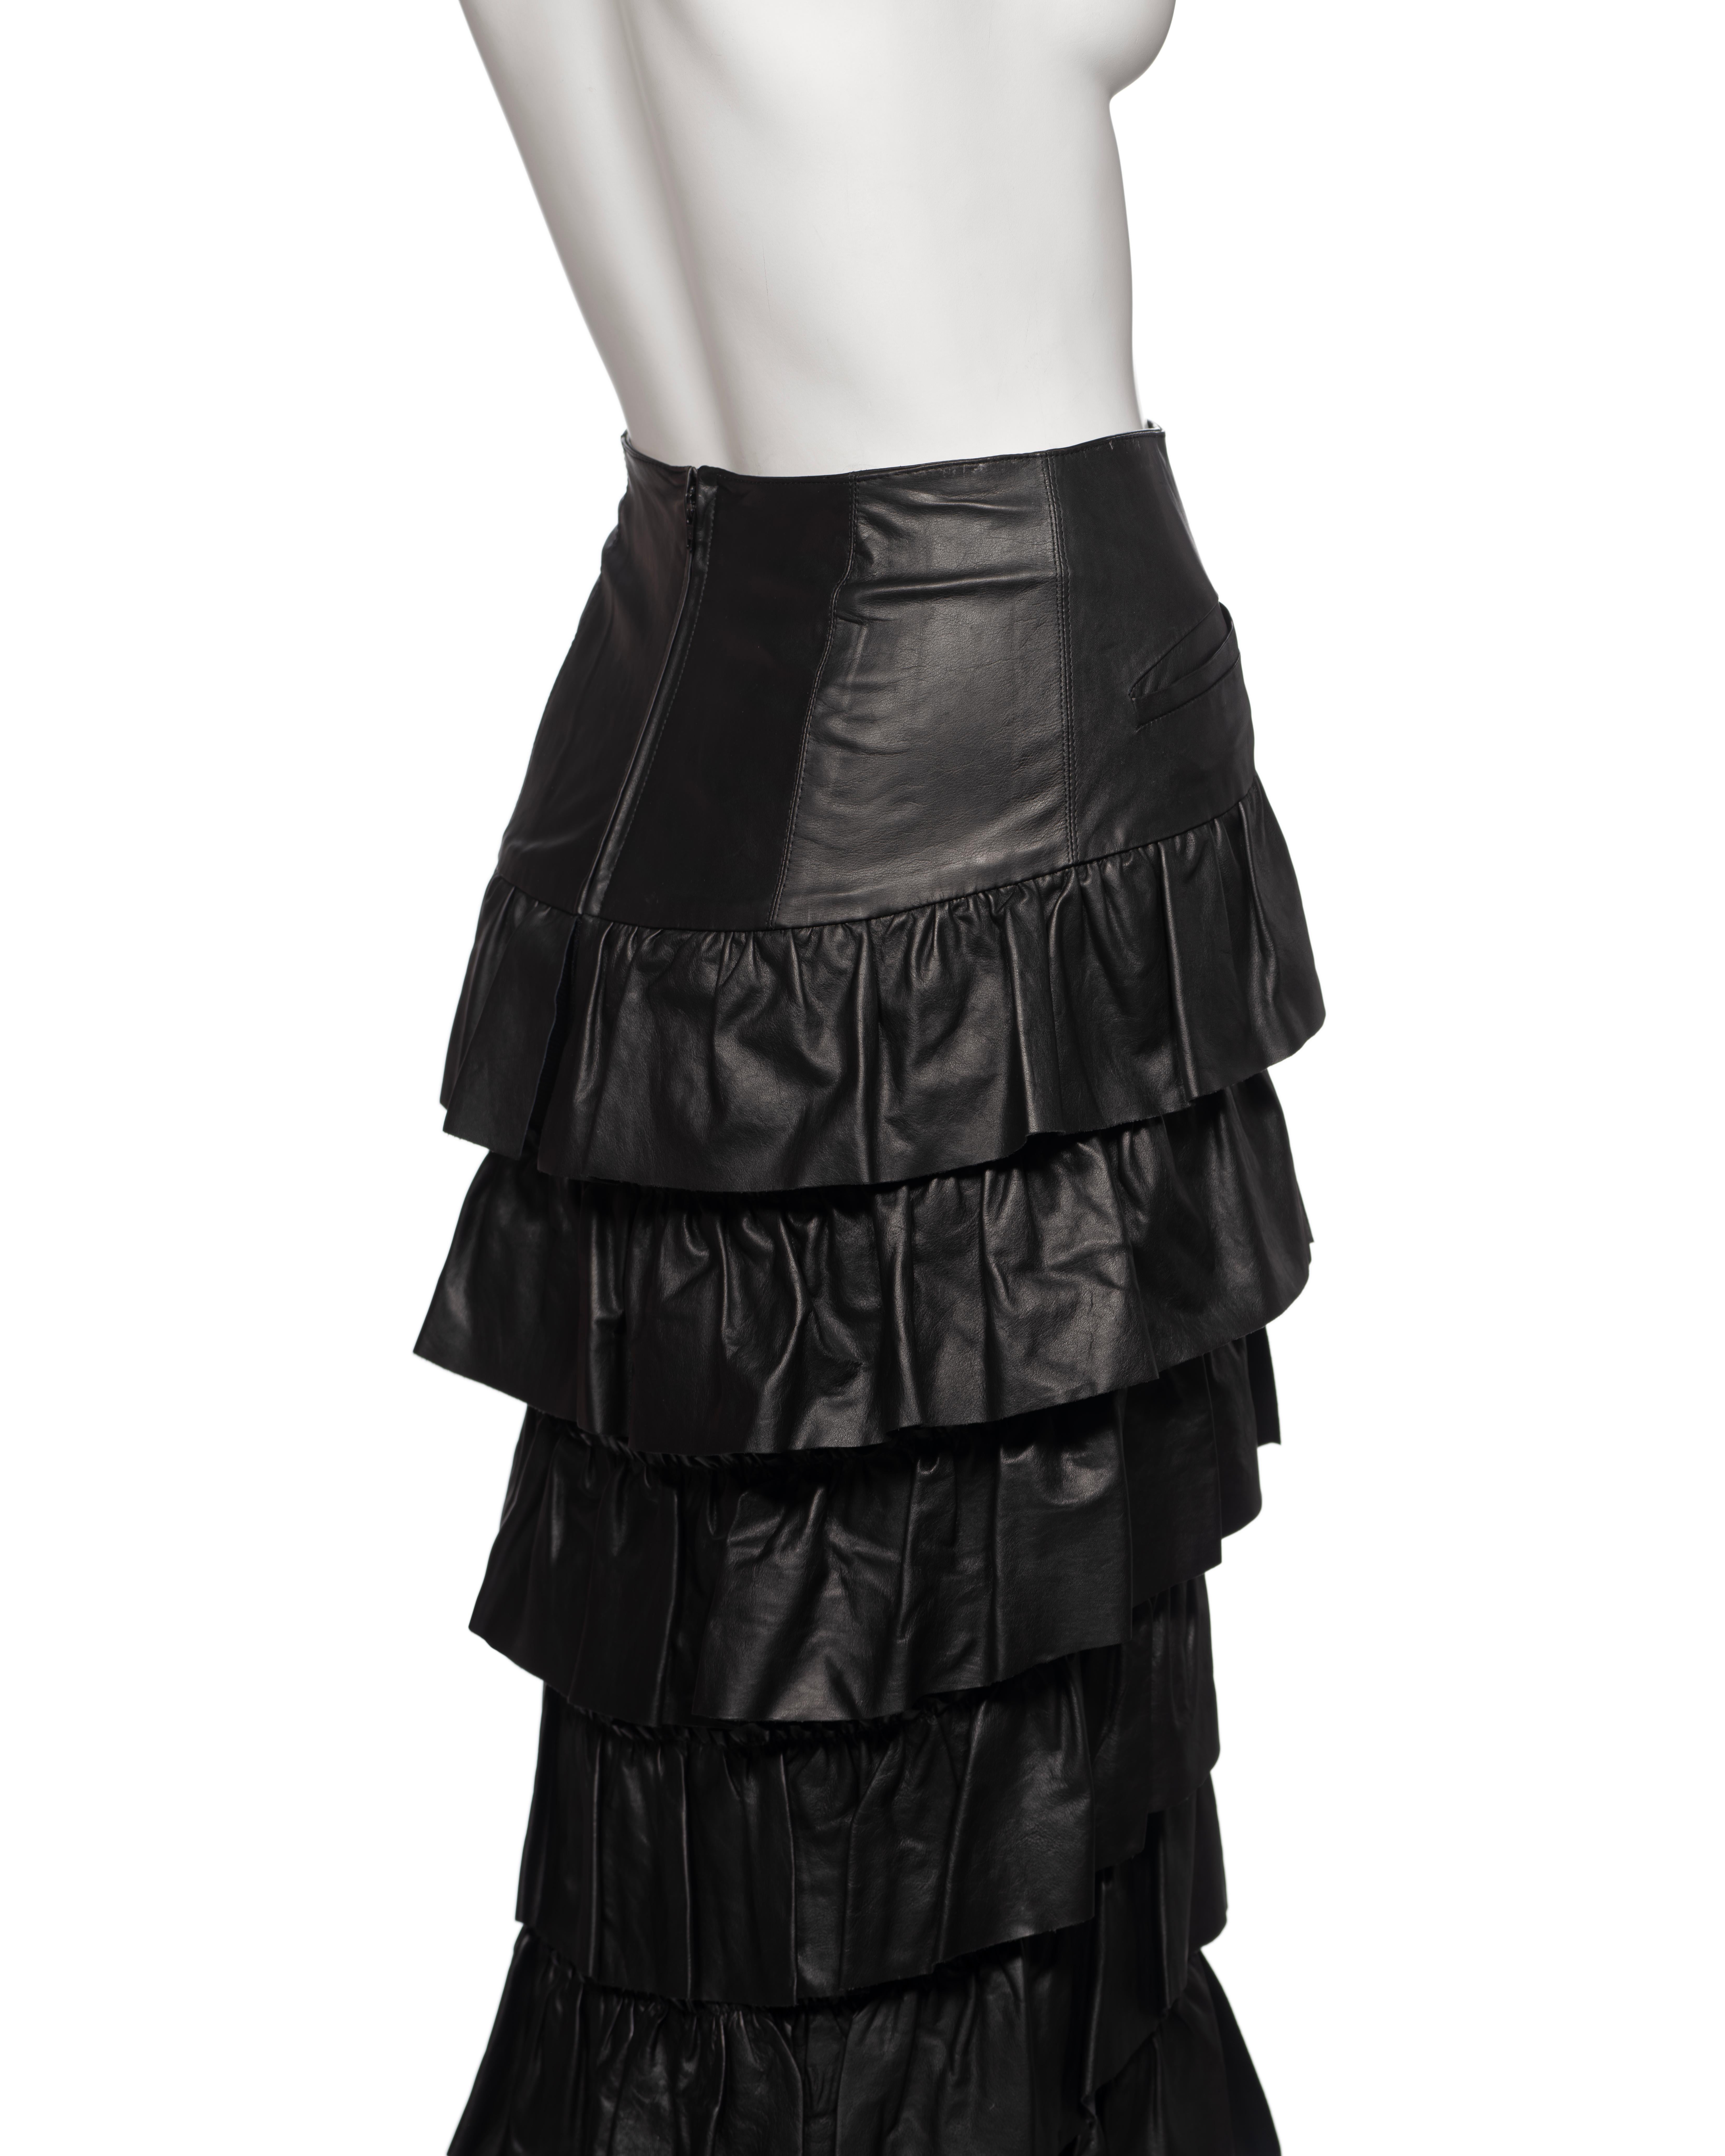 Chanel by Karl Lagerfeld Black Leather Tiered Ruffled Maxi Skirt, FW 2001 For Sale 5